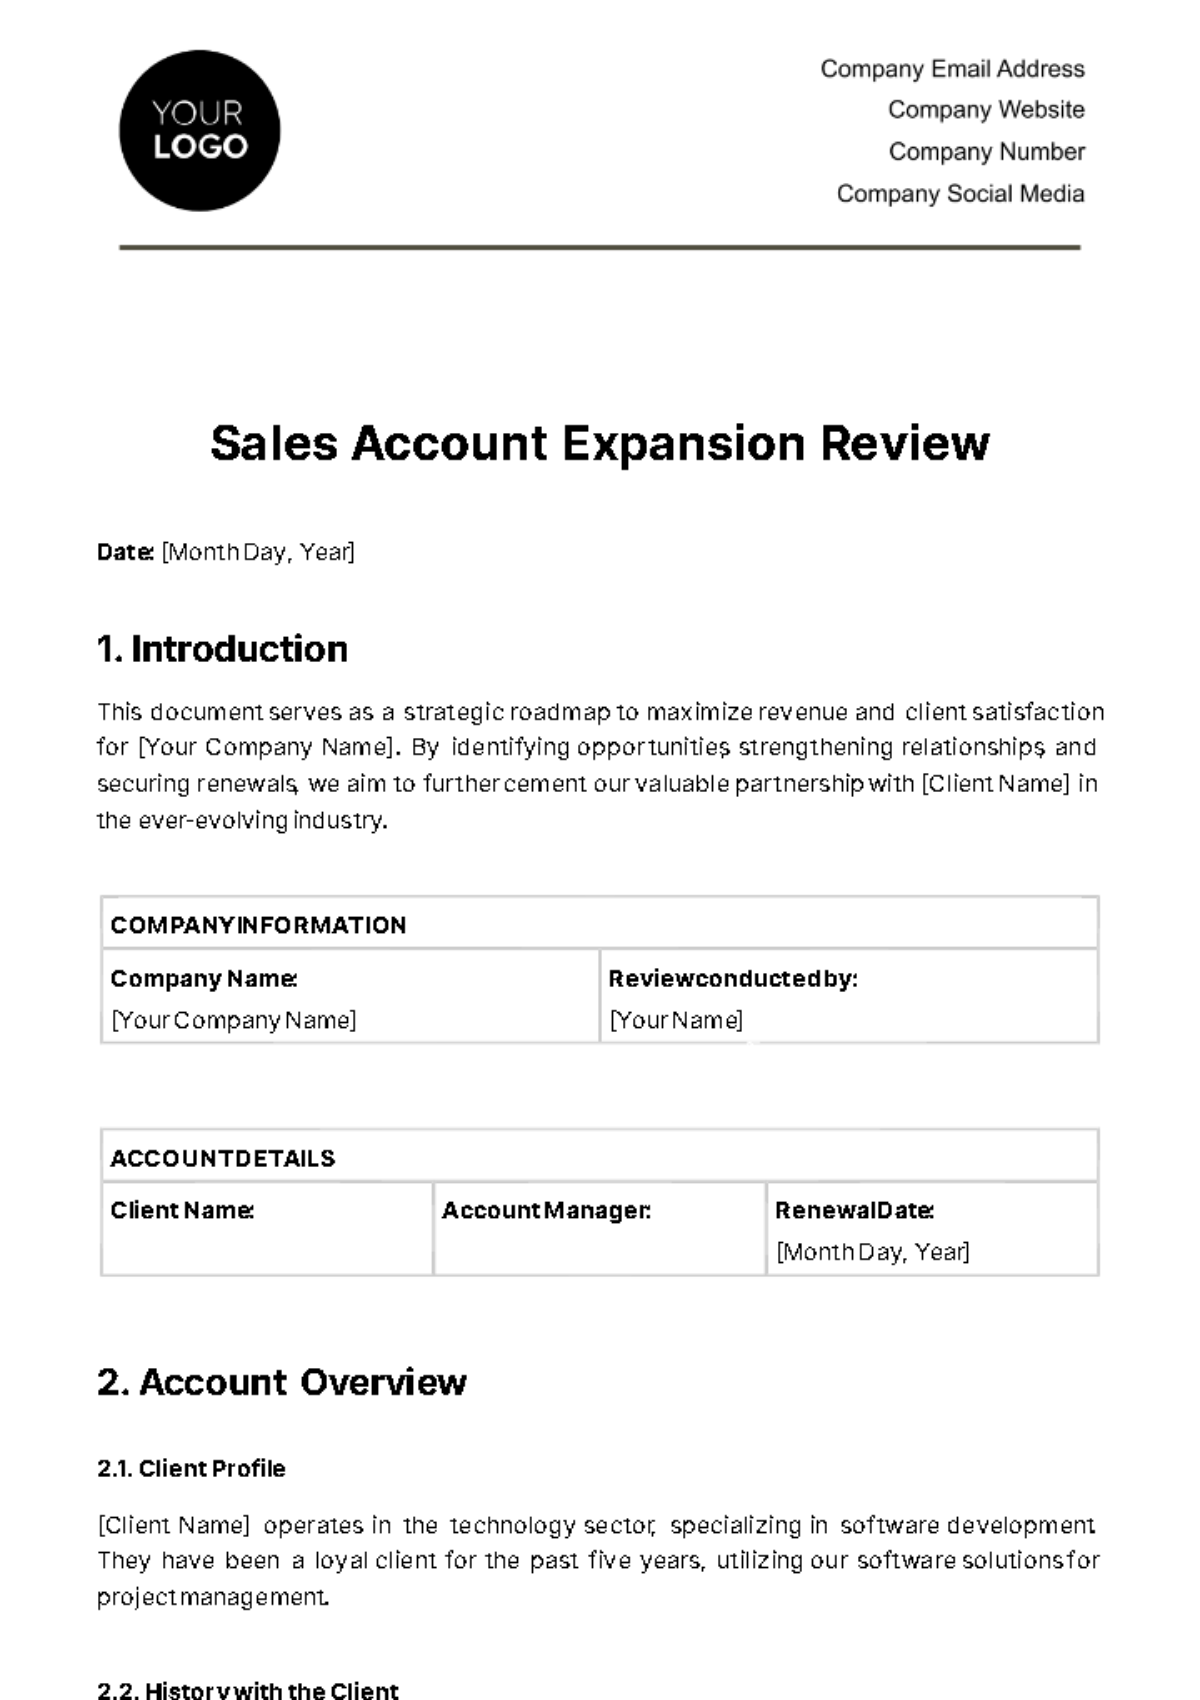 Free Sales Account Expansion Review Template